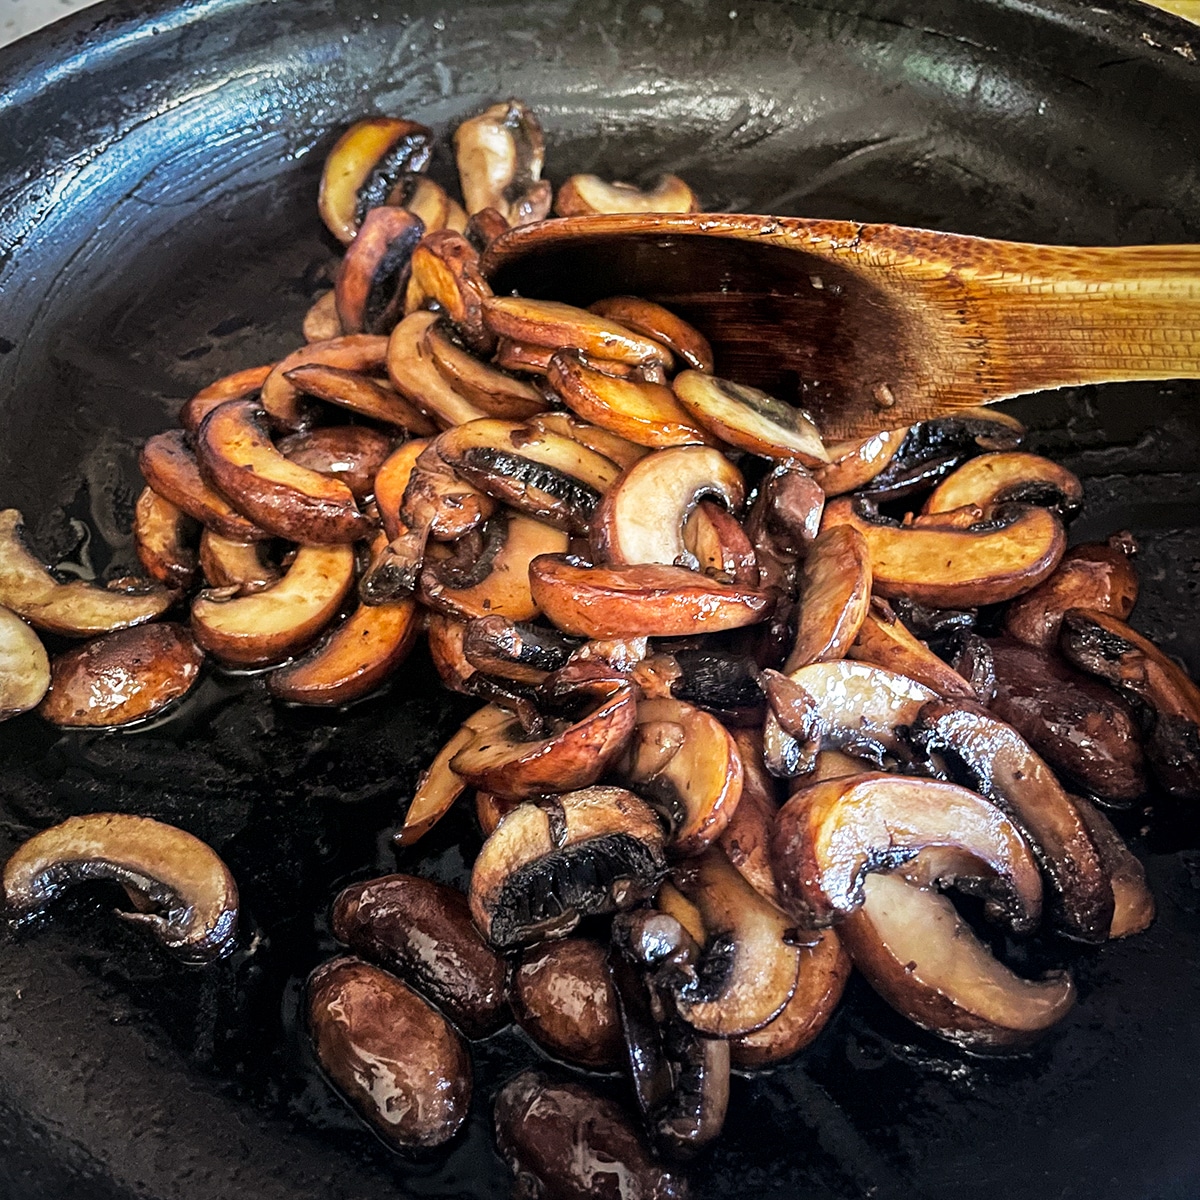 Sliced mushrooms cooking in a hot skillet until they are caramelized.